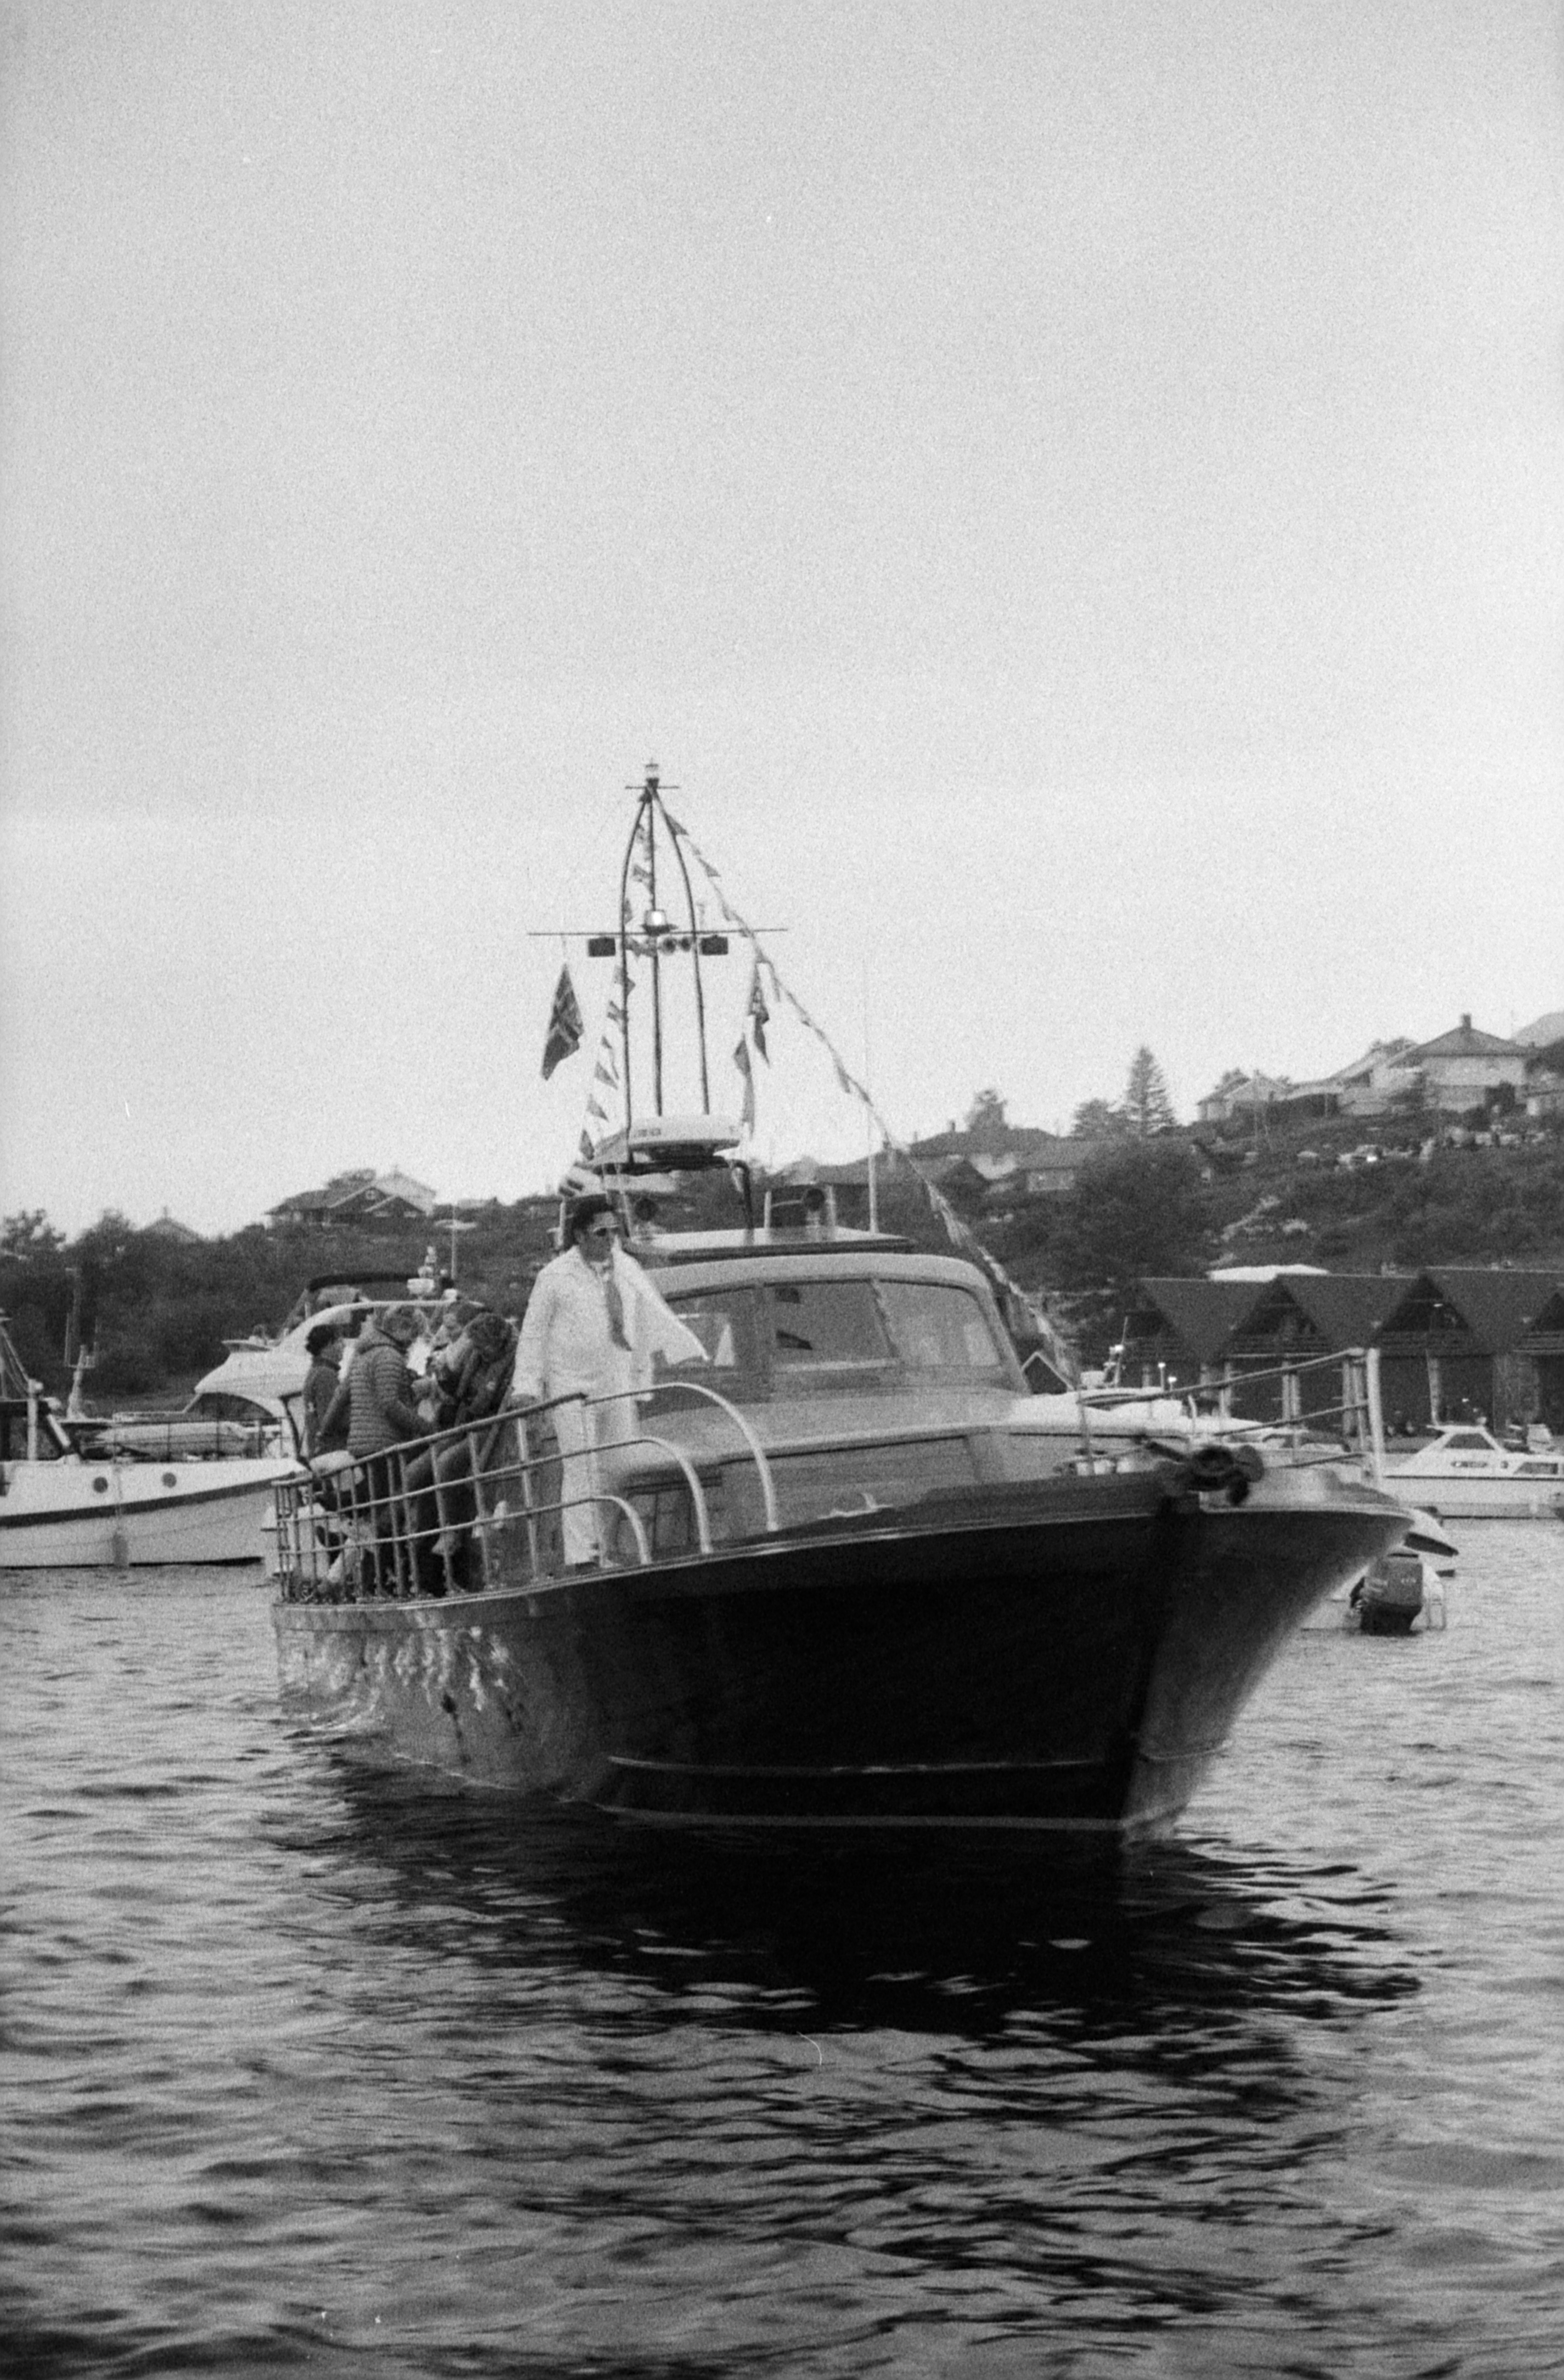 Black and white picture of a boat with an Elvis impersonator on it